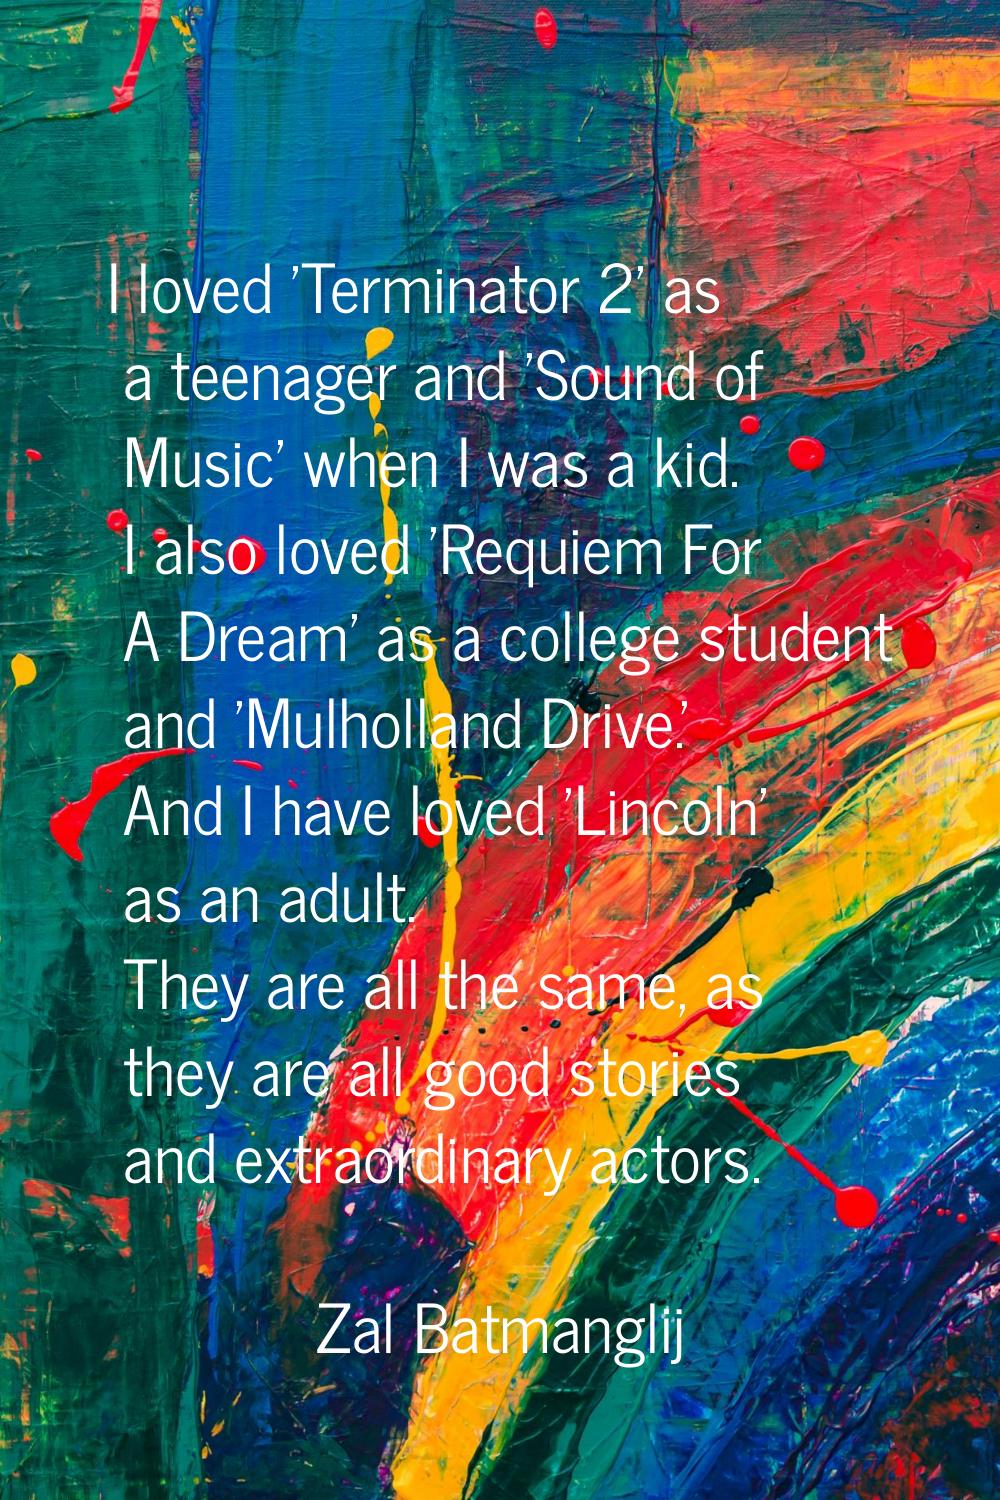 I loved 'Terminator 2' as a teenager and 'Sound of Music' when I was a kid. I also loved 'Requiem F